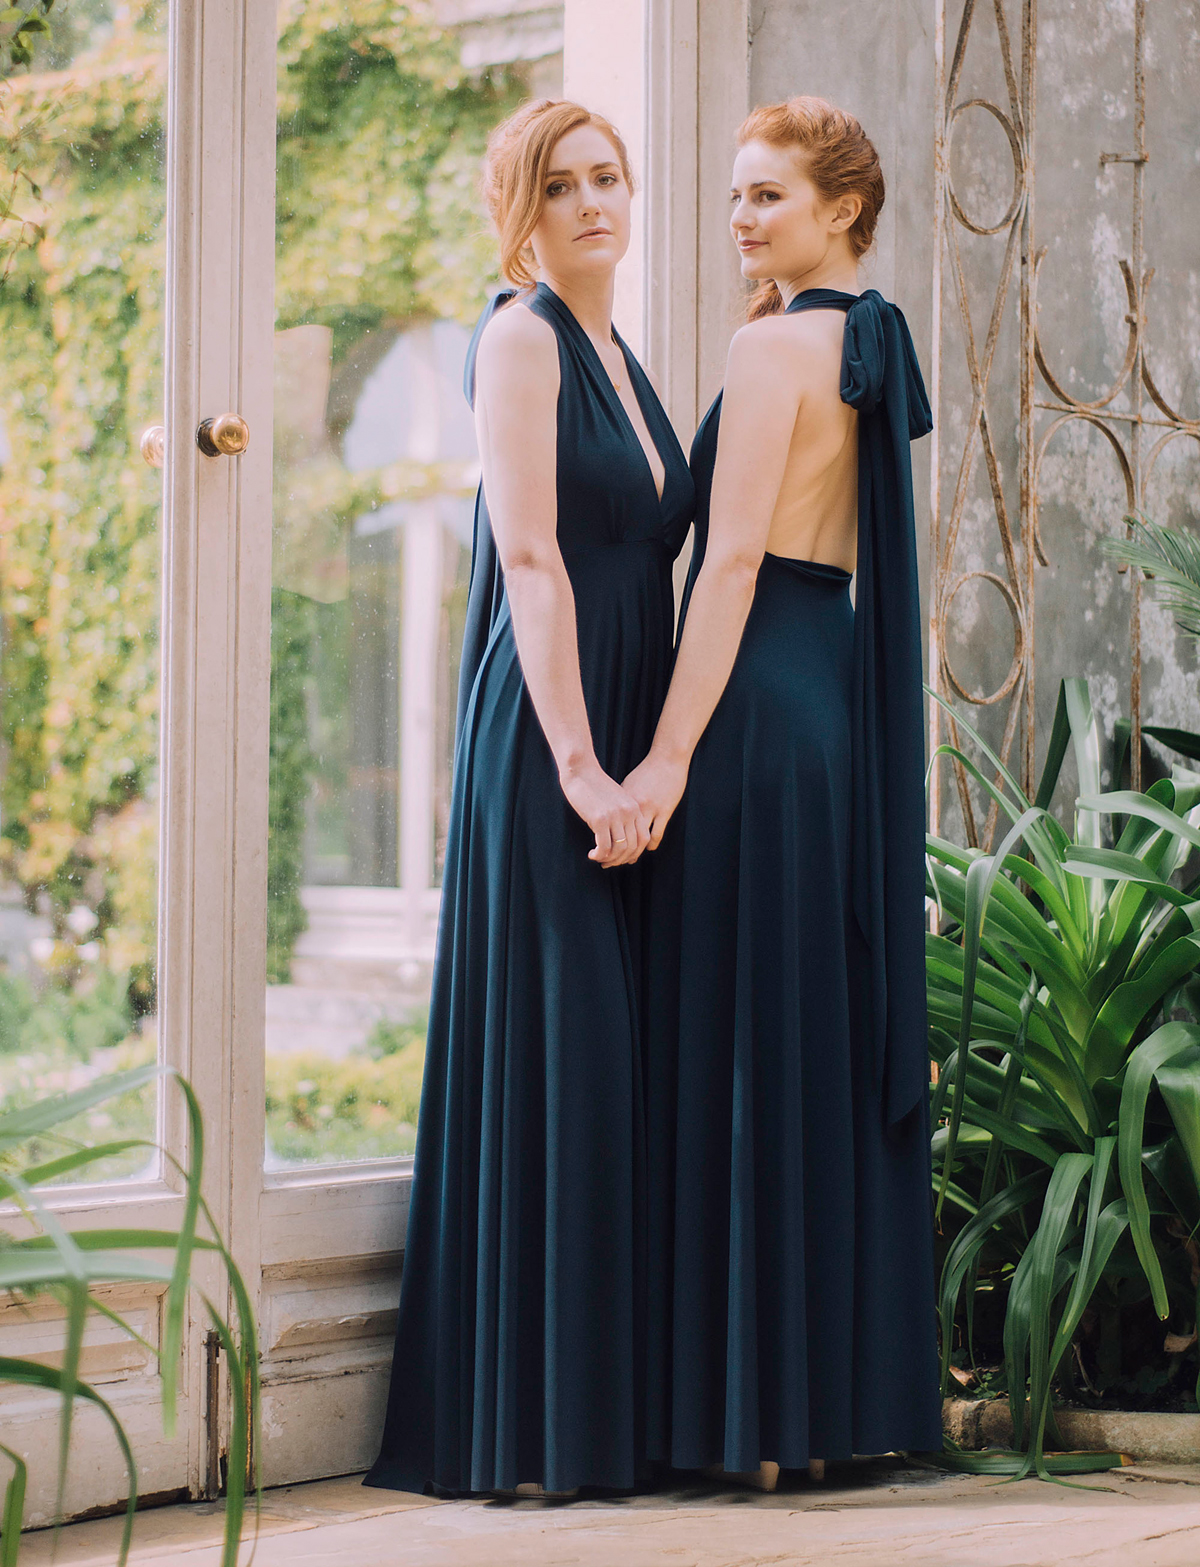 Willow Pearl multiway bridesmaids dresses Willow multiway dresses in Soft Navy